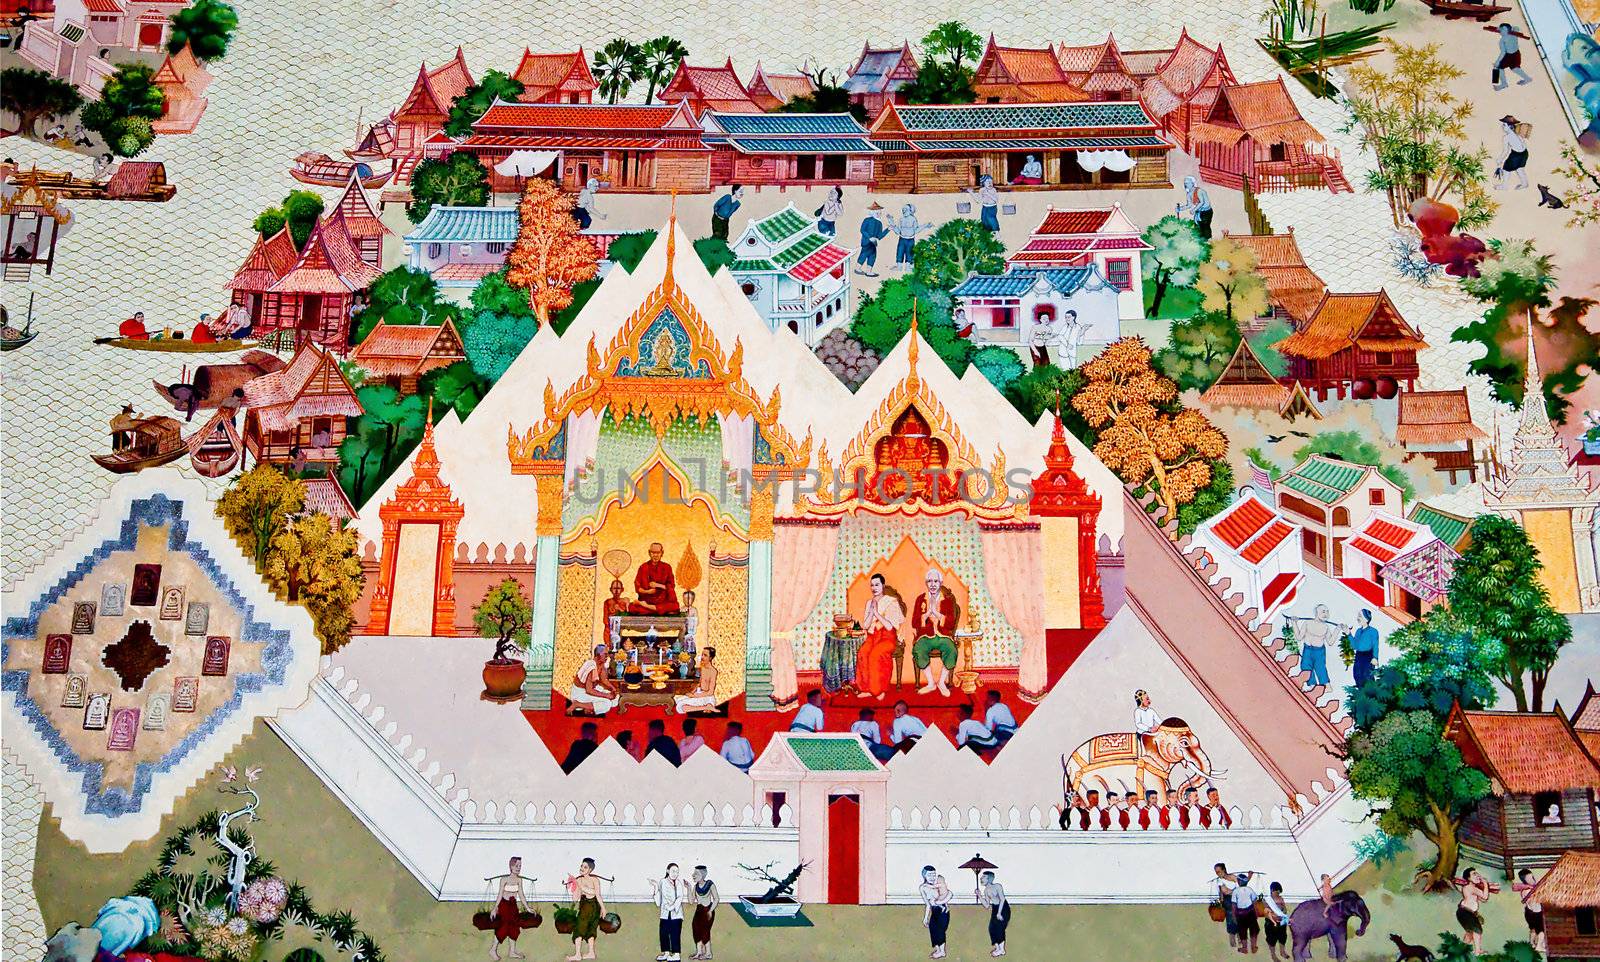 BANGKOK ,THAILAND - MAY 6 : Ancient  painting on monastery wall in Buddhist temple on May 6, 2012 in Bangkok, Thailand. Ancient painting showing the cultural life of Thai people in ancient times